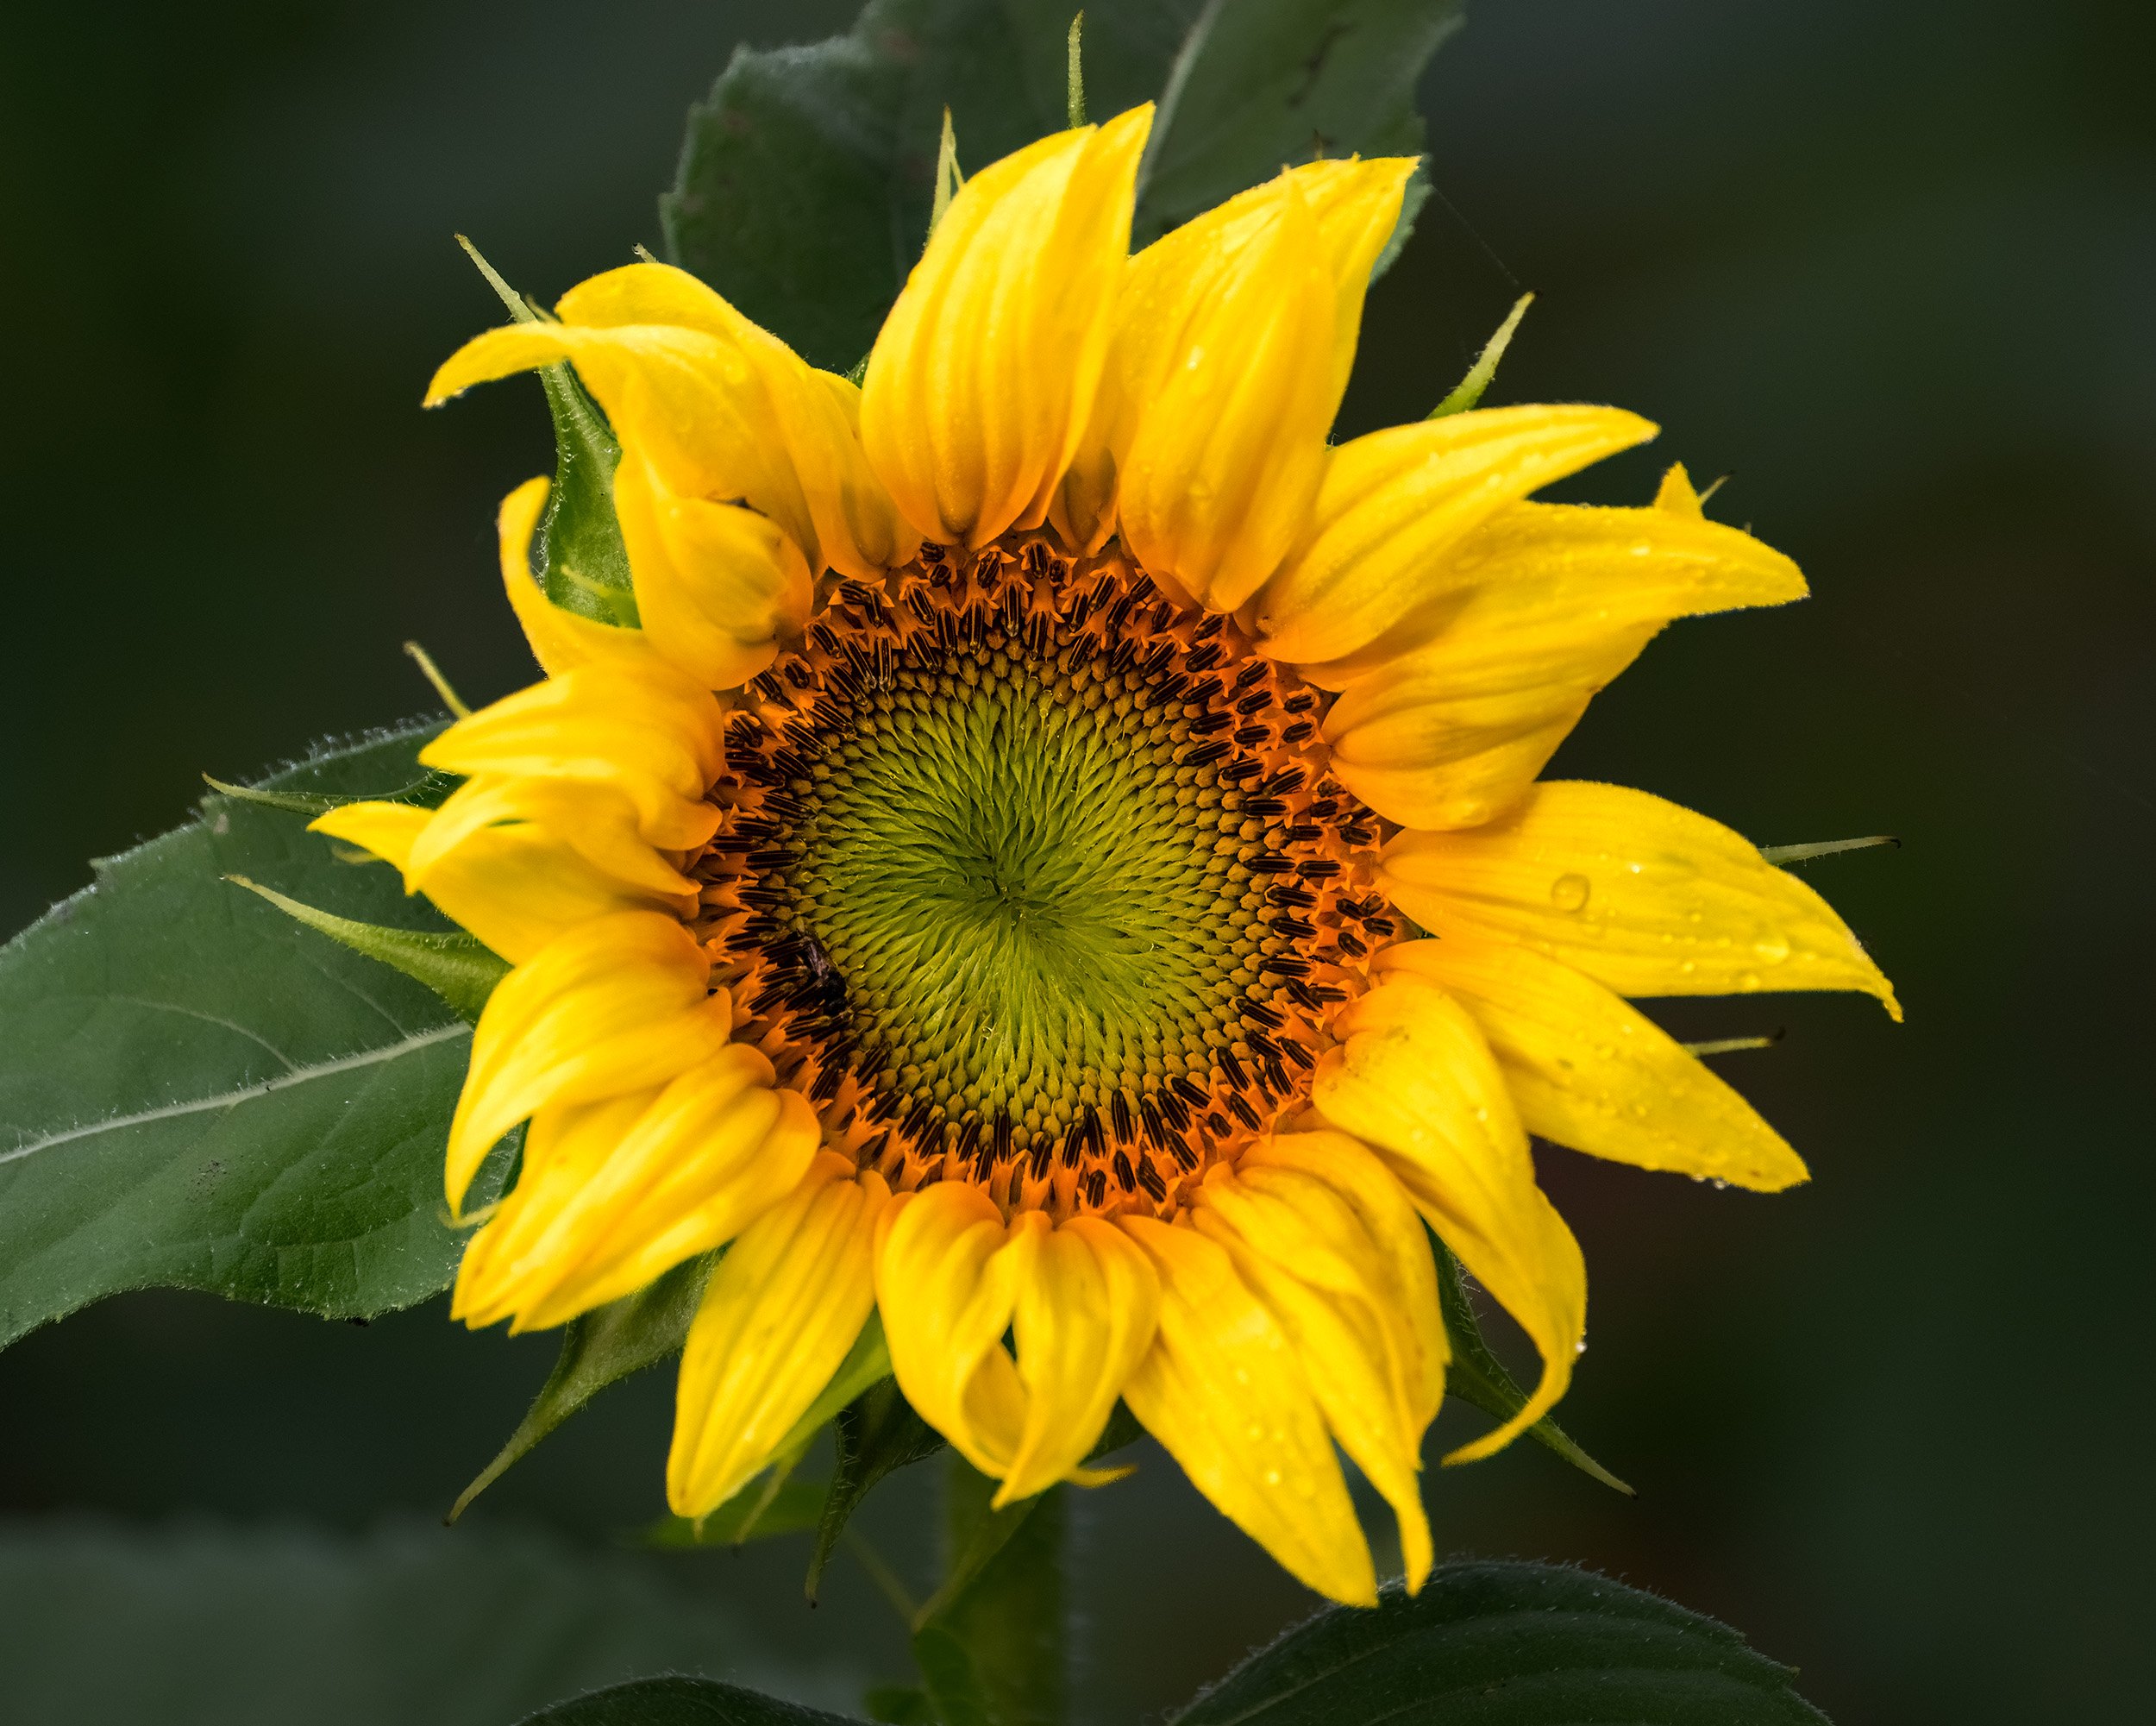 A Sunflower at McKee Beshers WMA